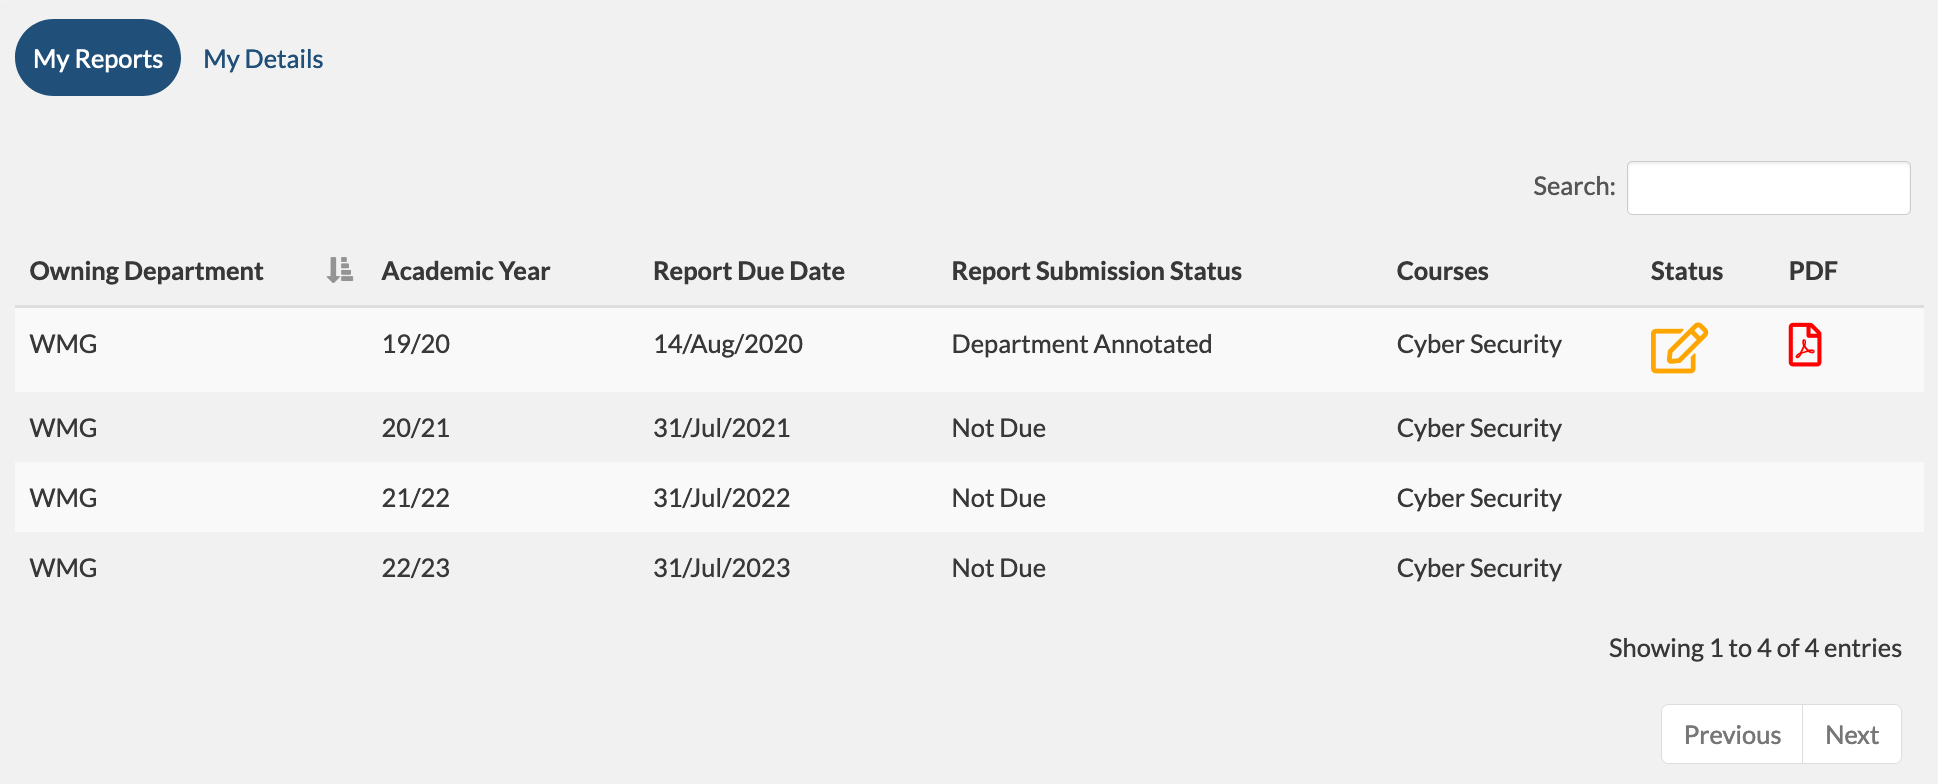 Screenshot of the My Reports section in Evision showing all reports expected from an external examiner.